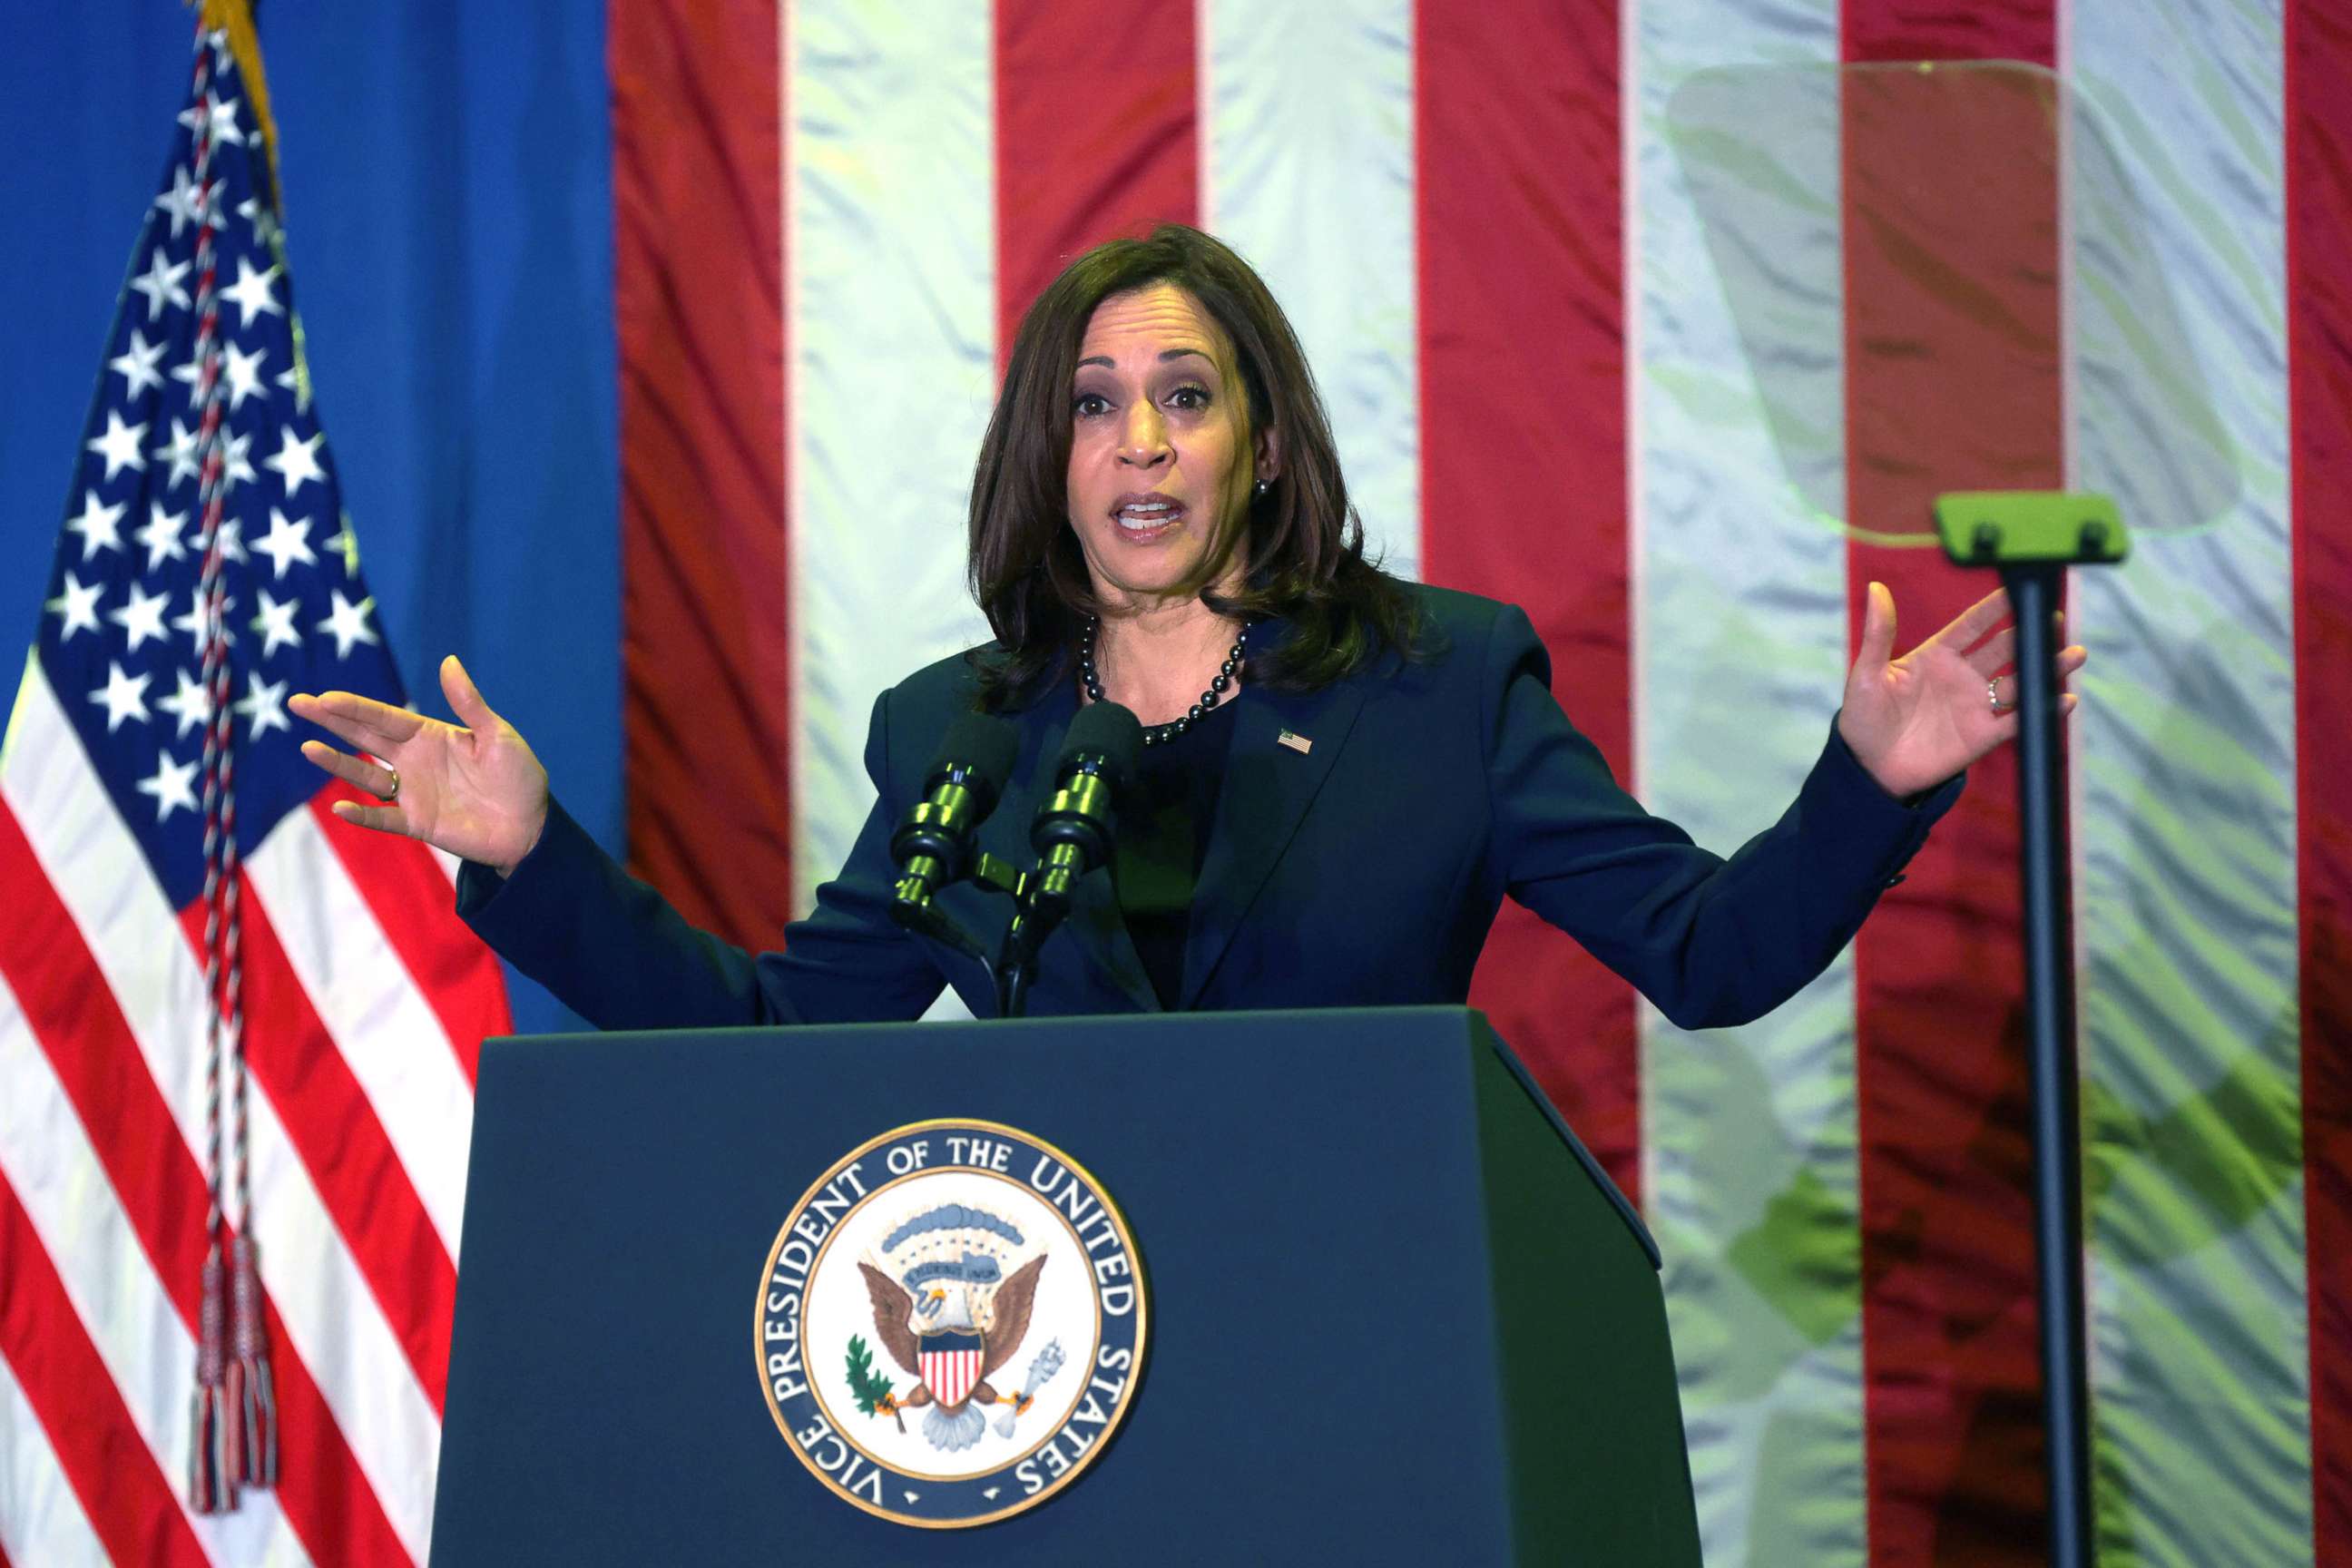 PHOTO: Vice President Kamala Harris speaks during an infrastructure announcement at AFL-CIO, Dec. 16, 2021, in Washington, D.C.